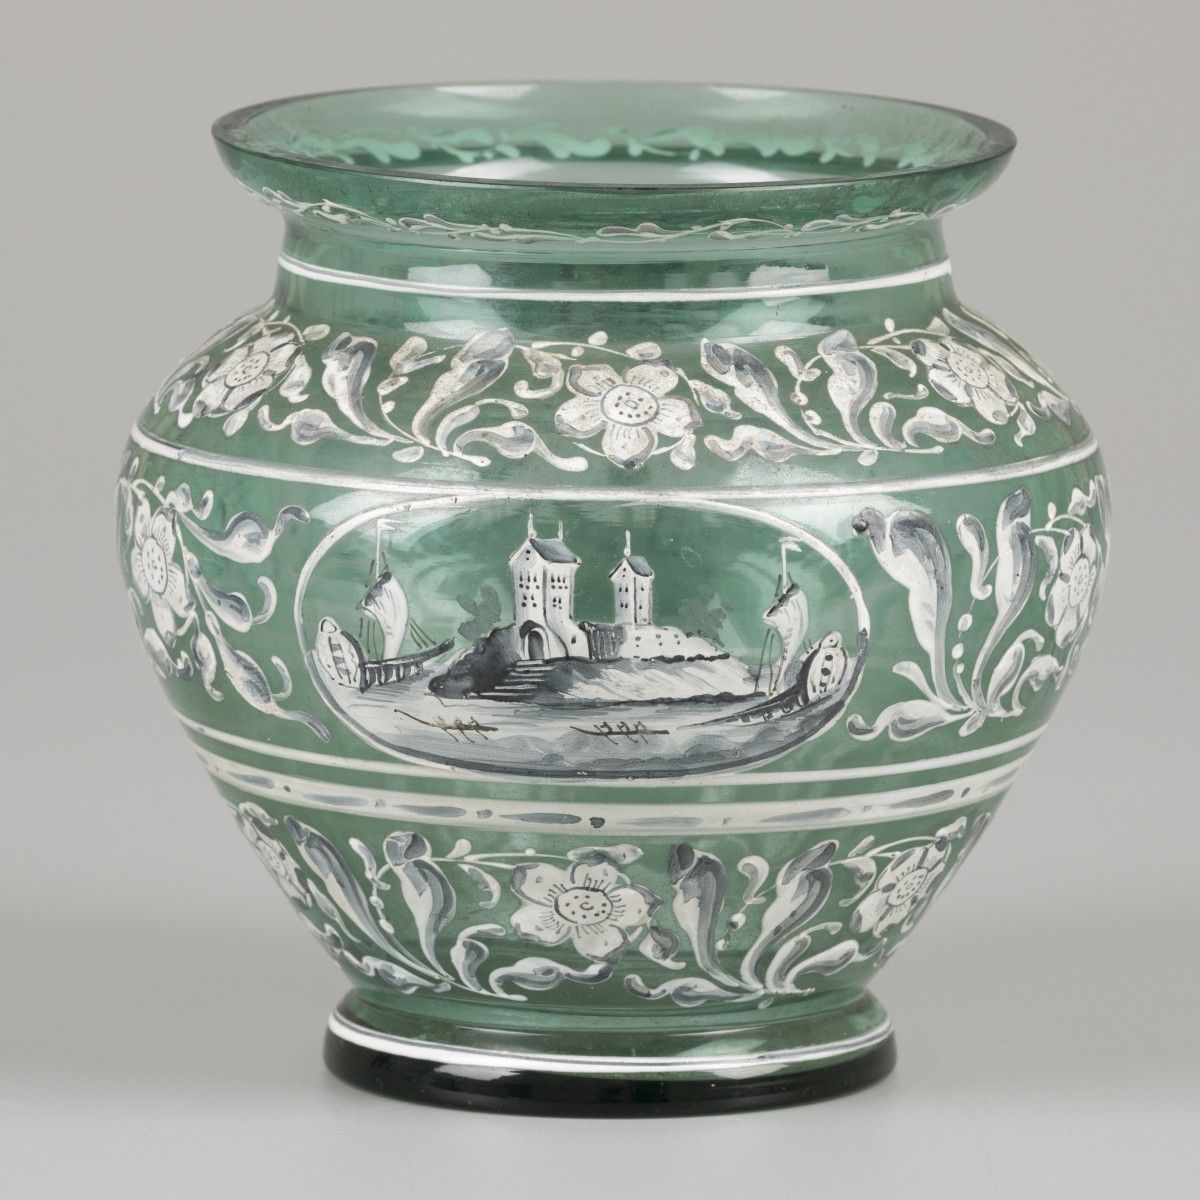 A glass vase with enamelled motif, Italy, 19th century. 手绘的各种边框图案的叶子，其中有两个开花的，两个&hellip;